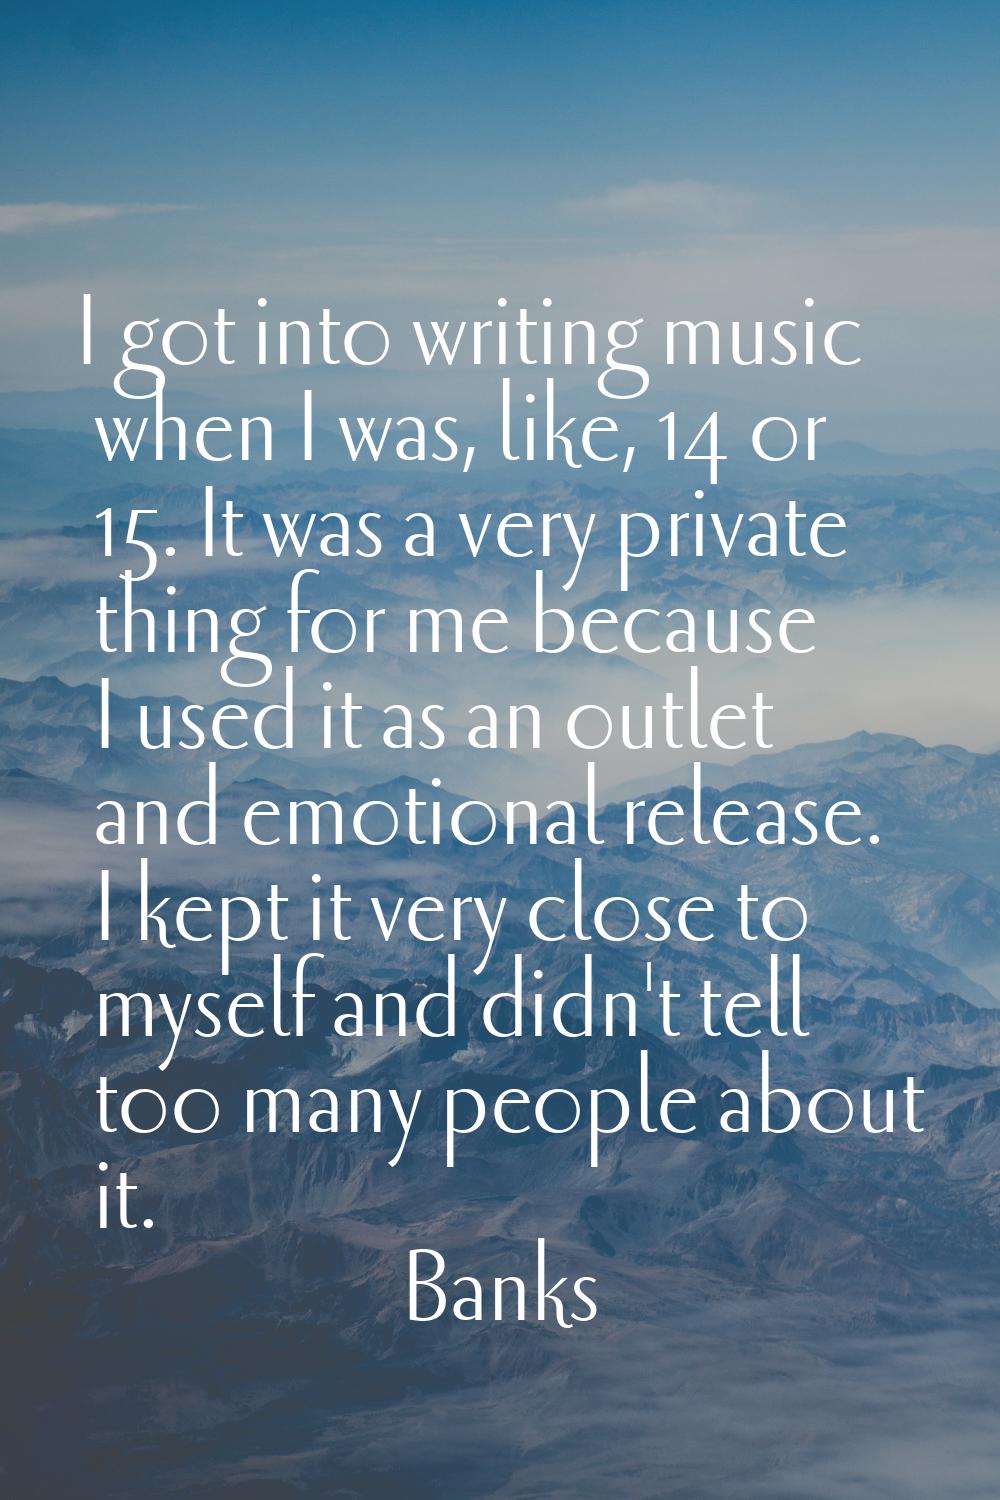 I got into writing music when I was, like, 14 or 15. It was a very private thing for me because I u